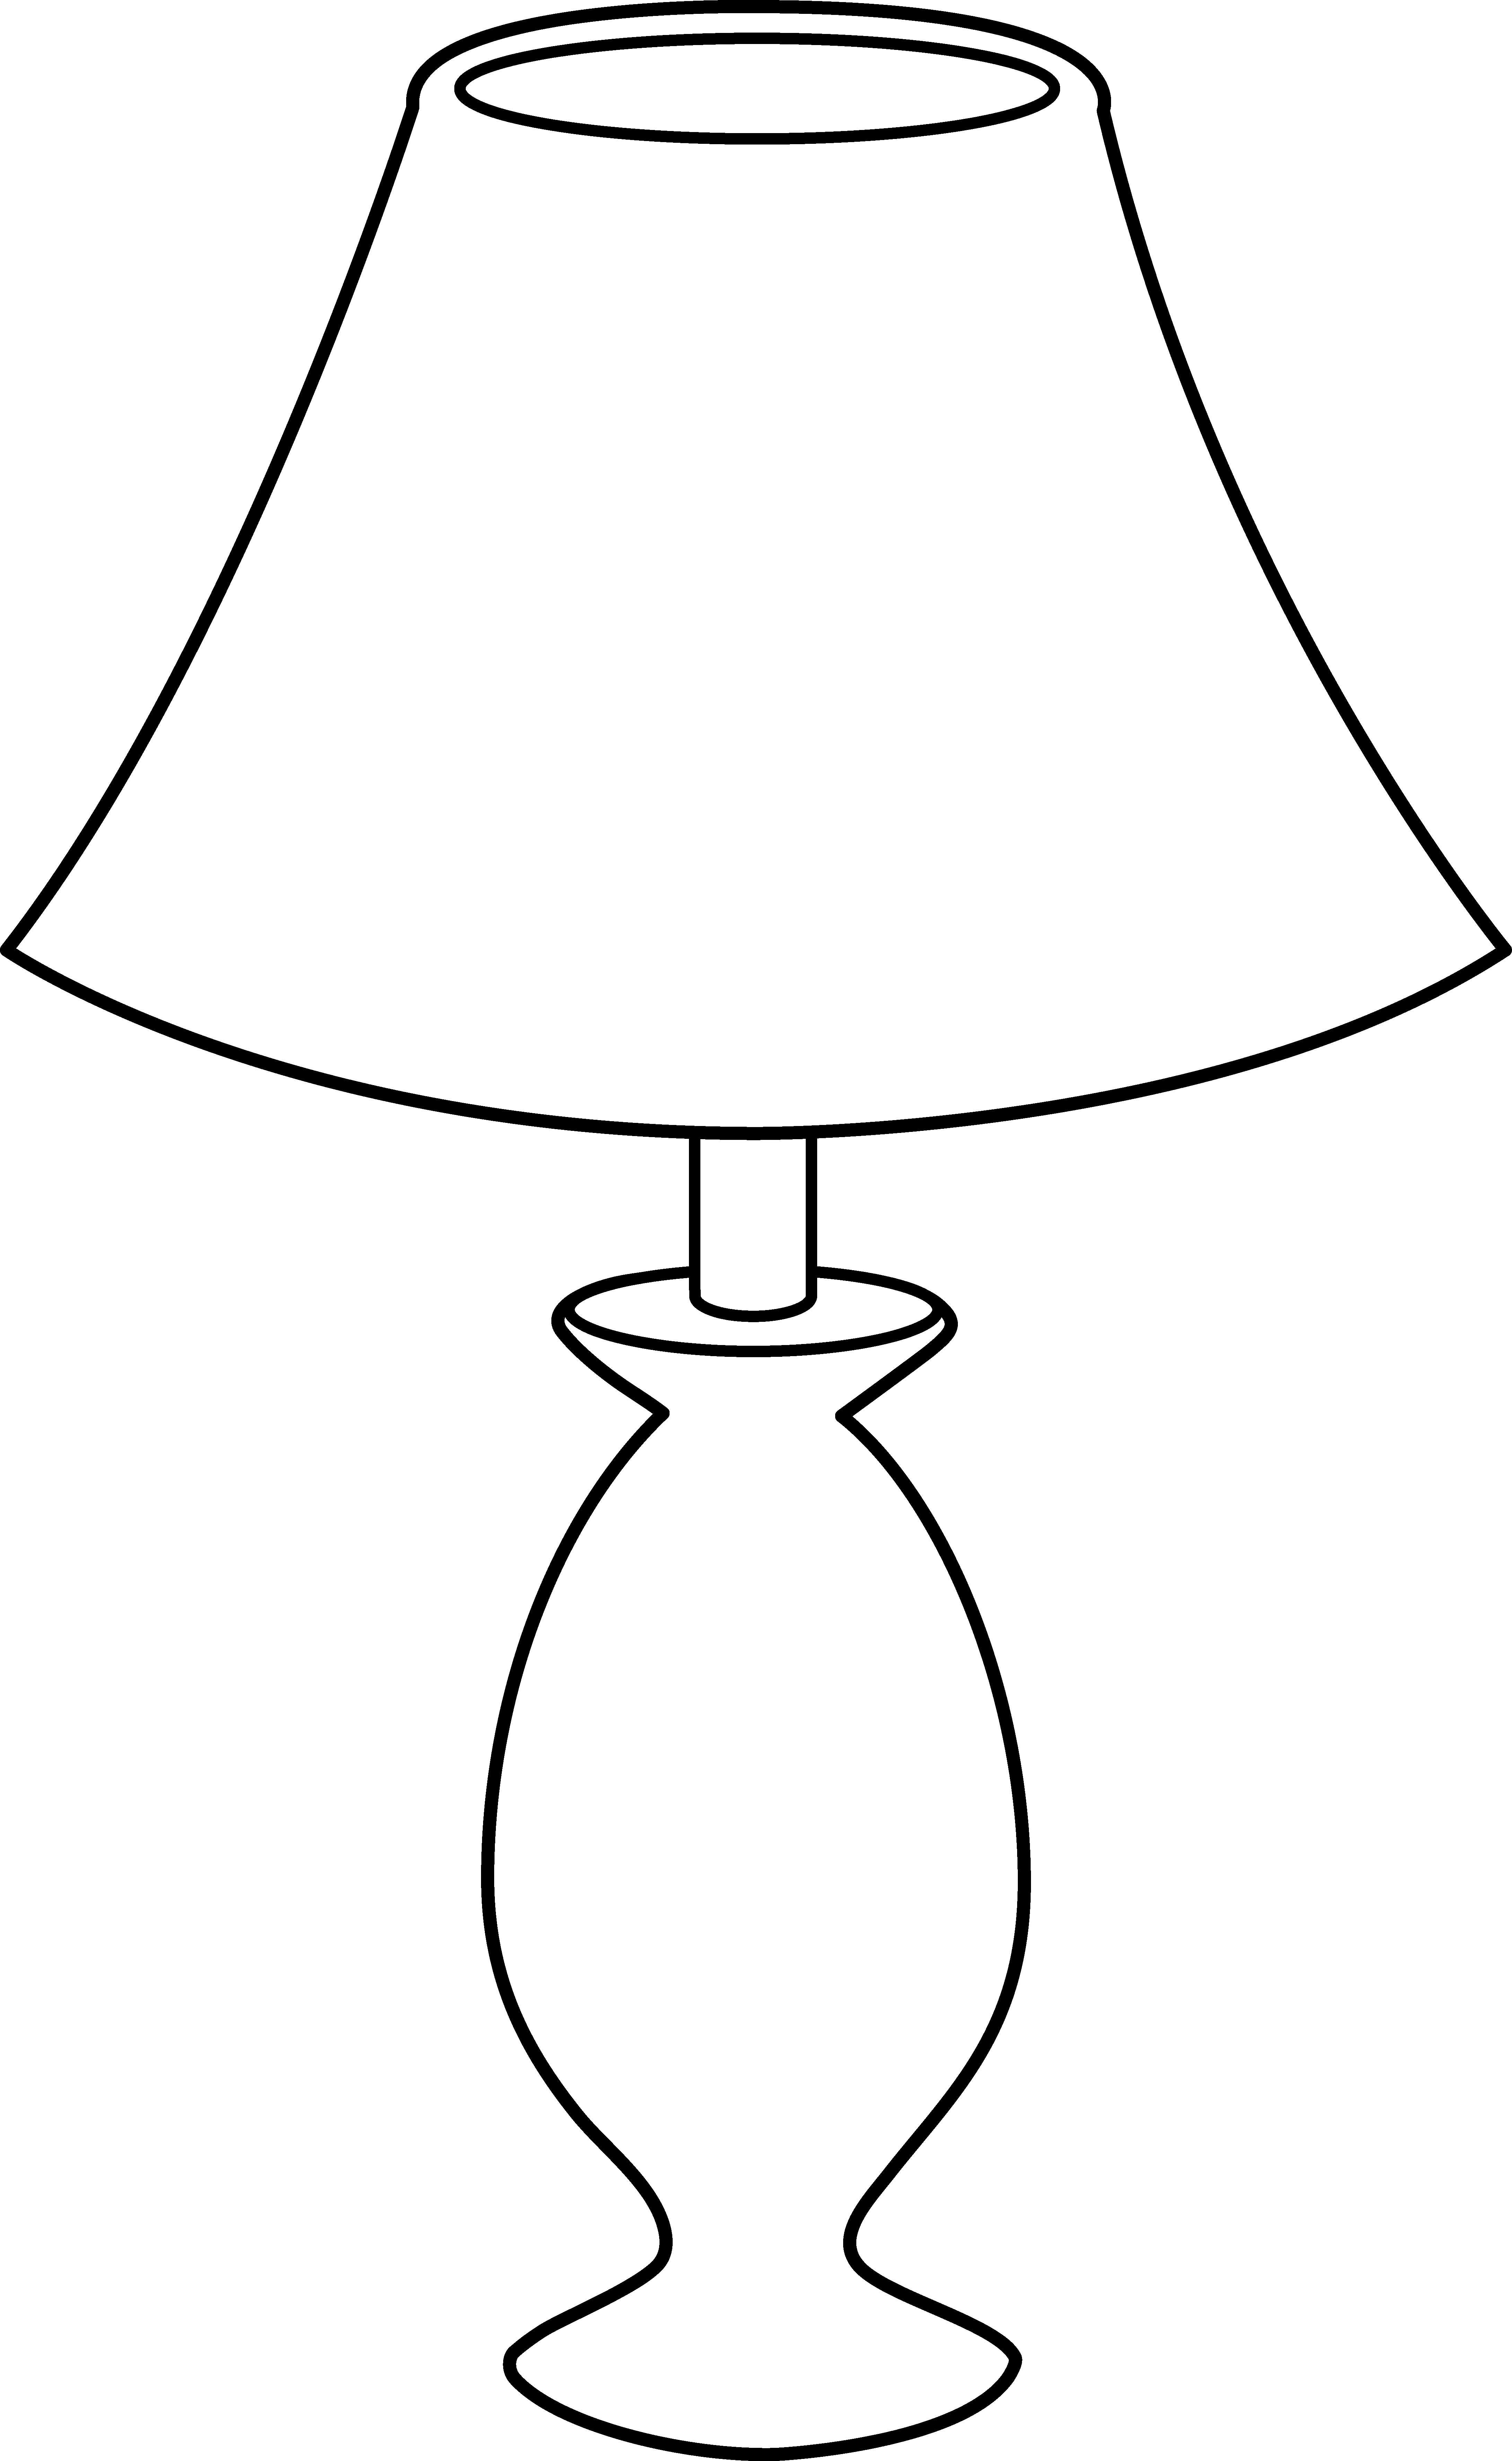 free-lamp-outline-download-free-lamp-outline-png-images-free-cliparts